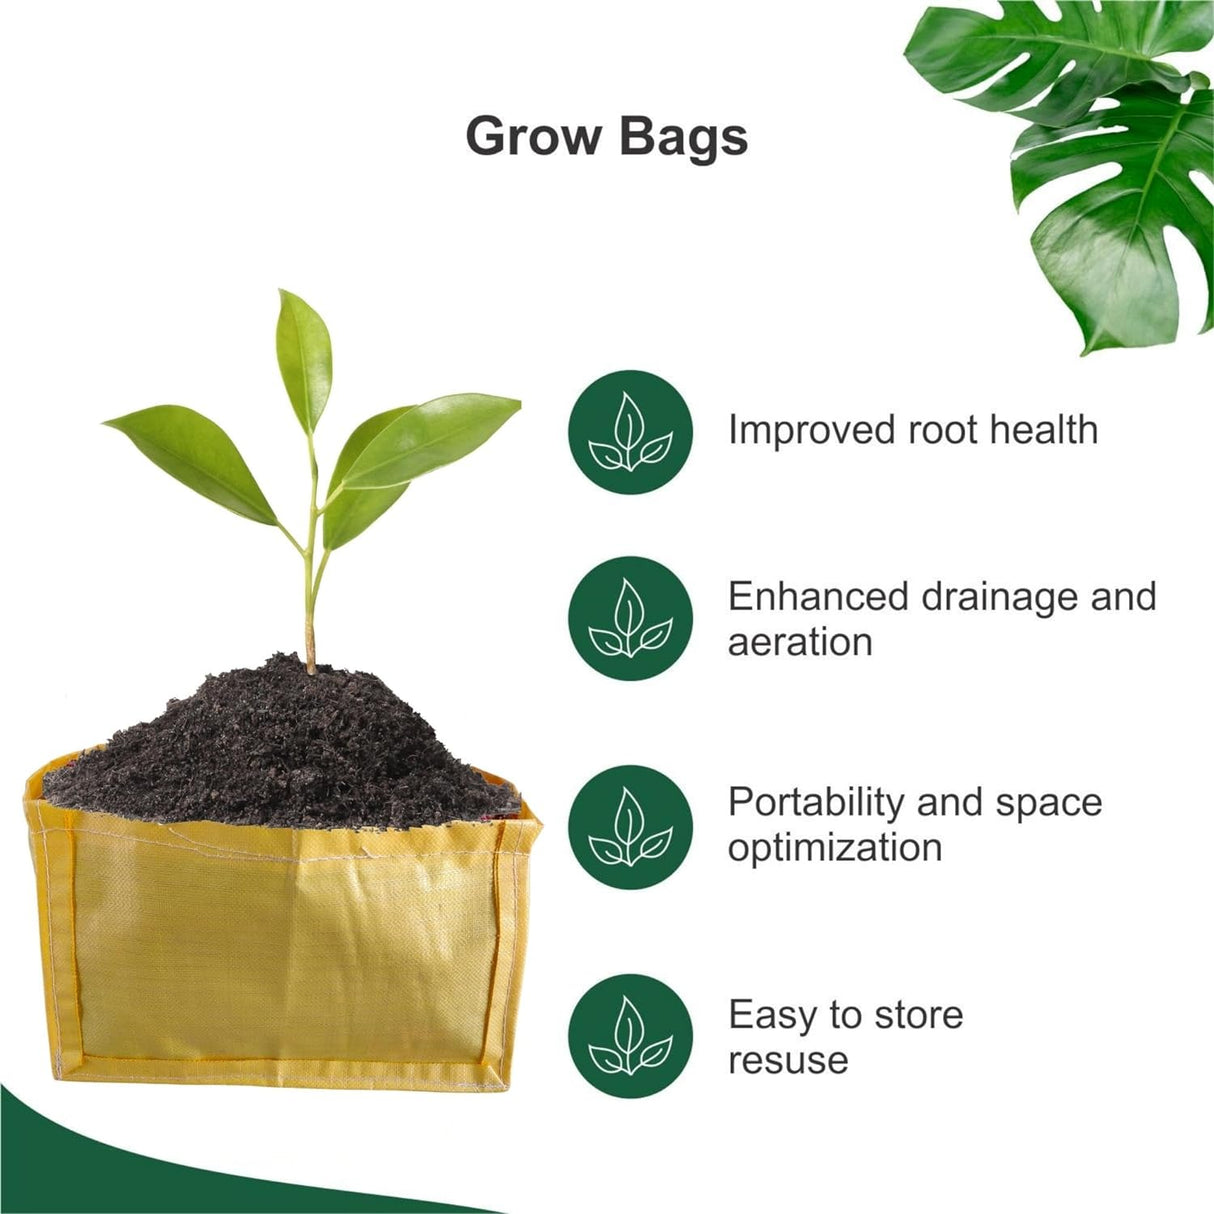 Yellow Grow Bag Rectangle 18x12x12 inch Pack of 5 pcs - Singhal Mart